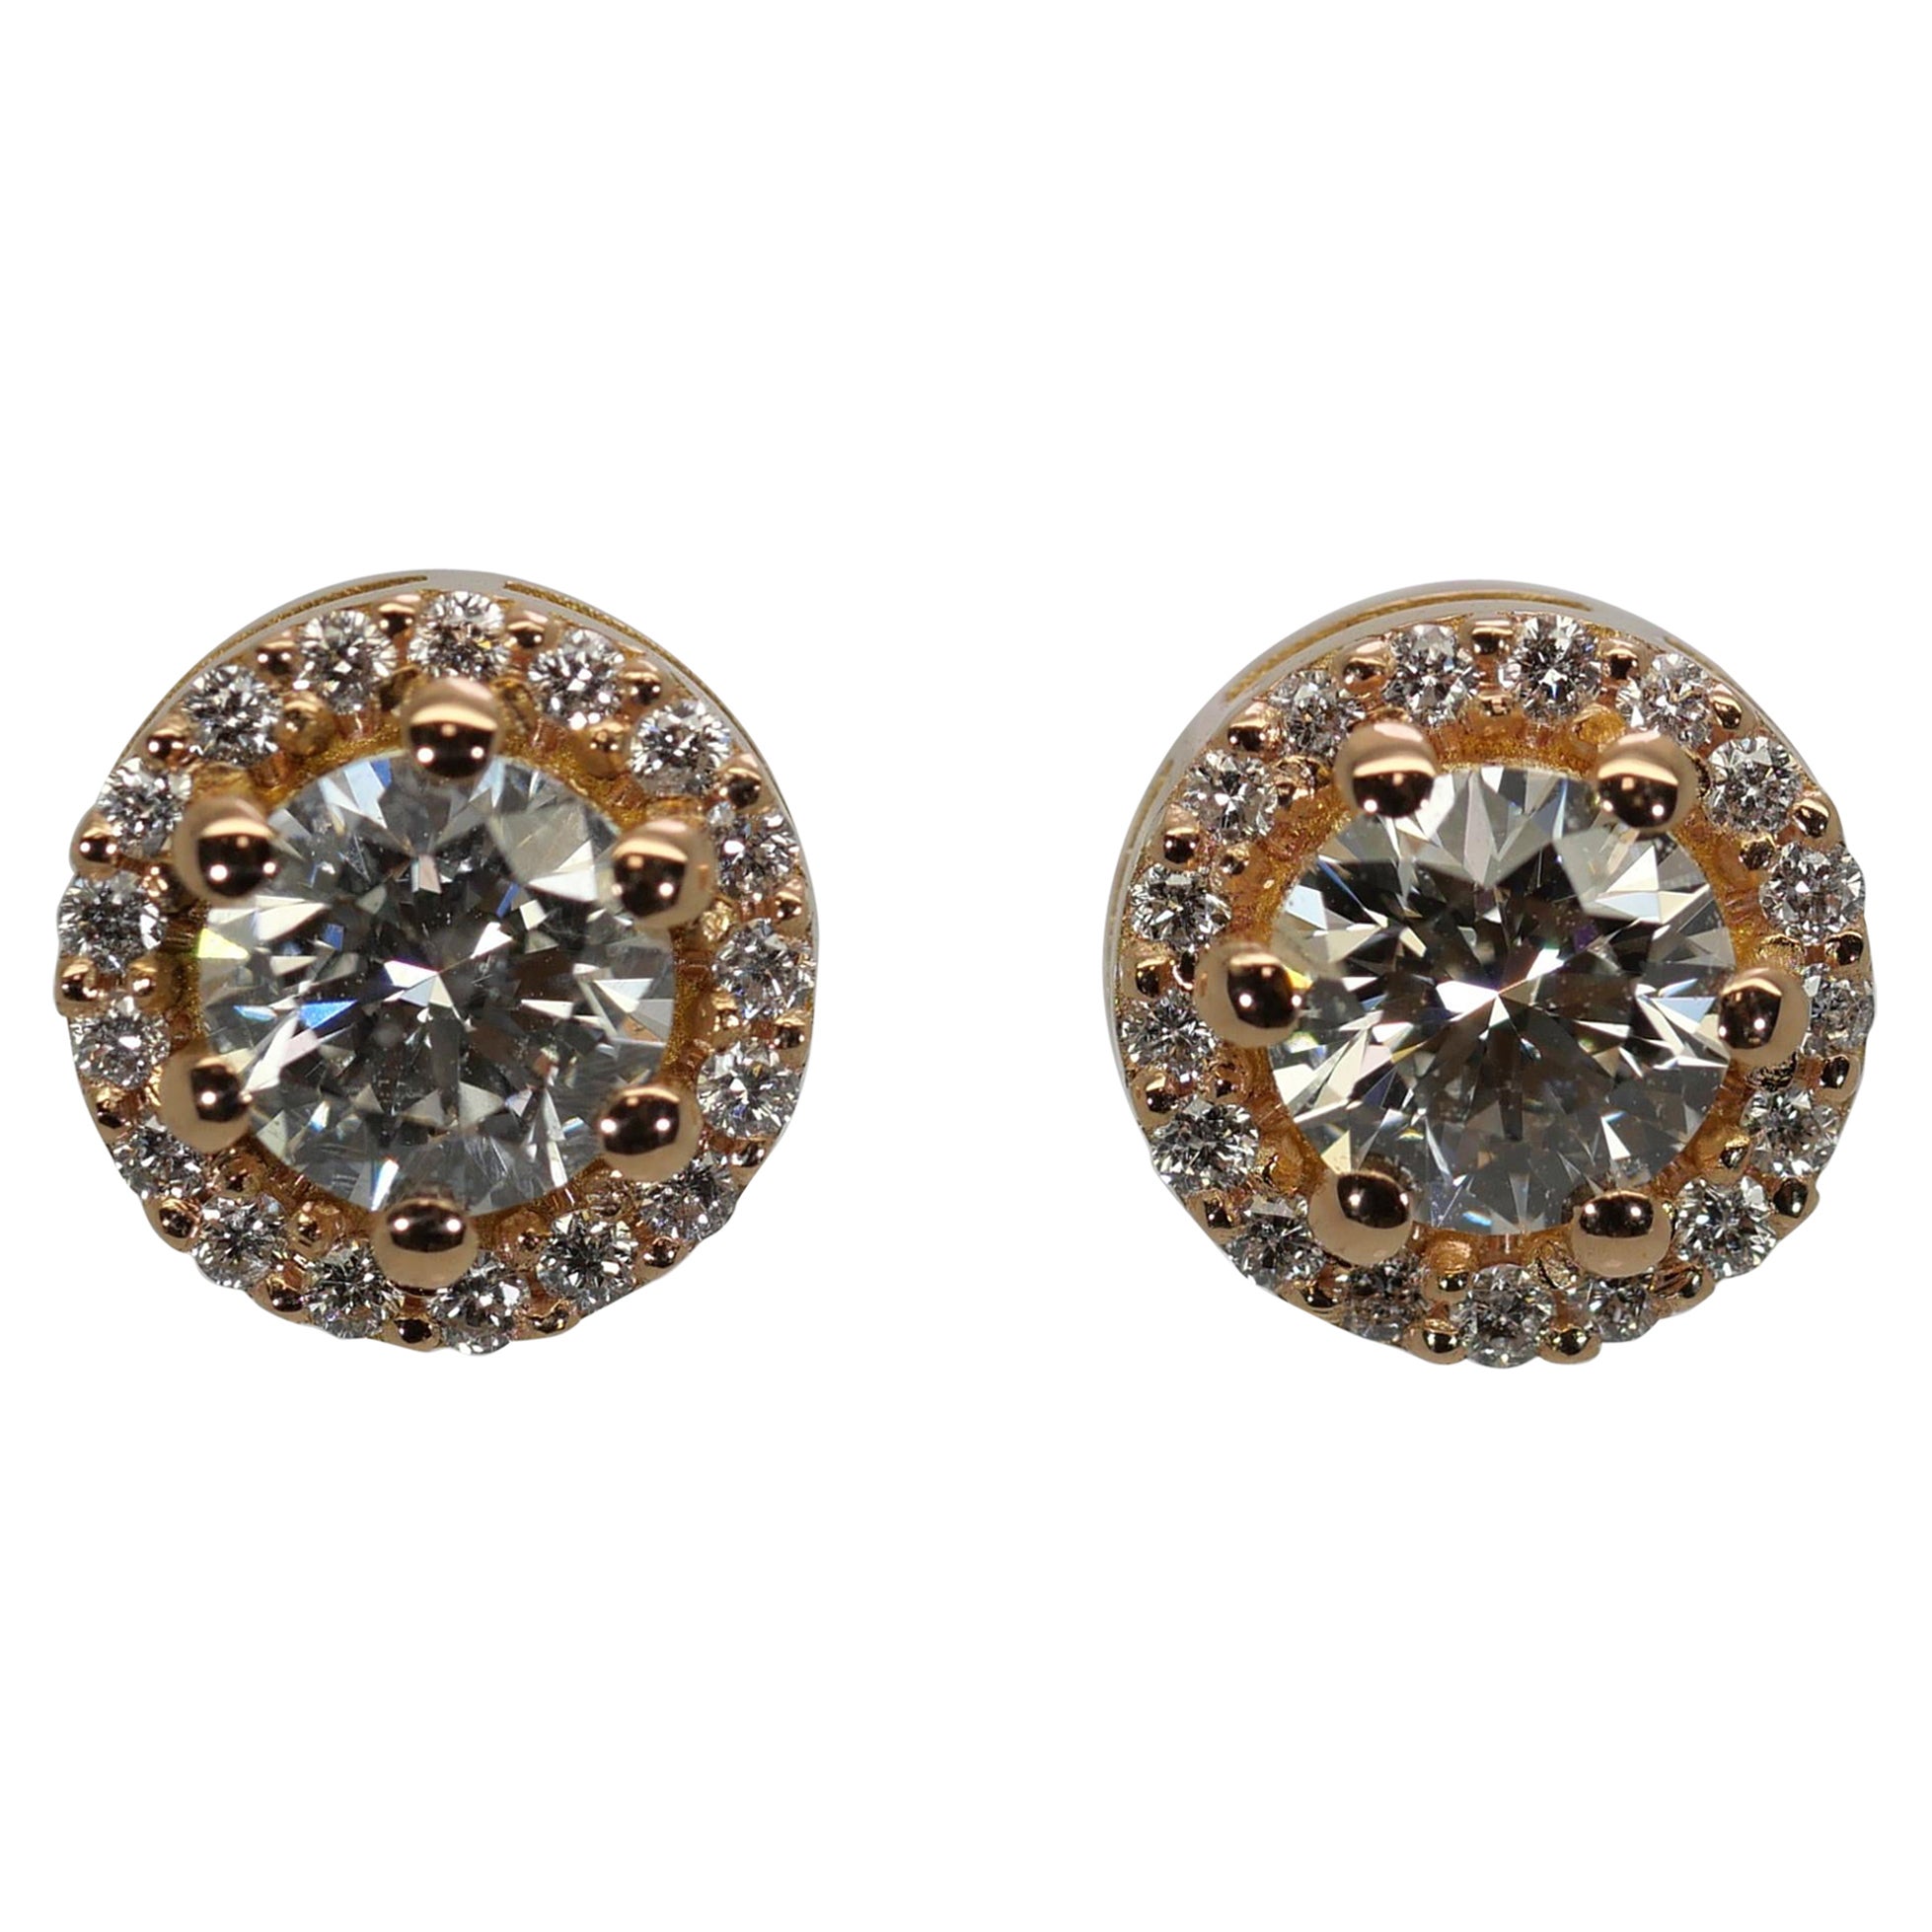 Beautiful 18k Rose Gold Halo Stud Earrings with 0.97 Natural Diamonds